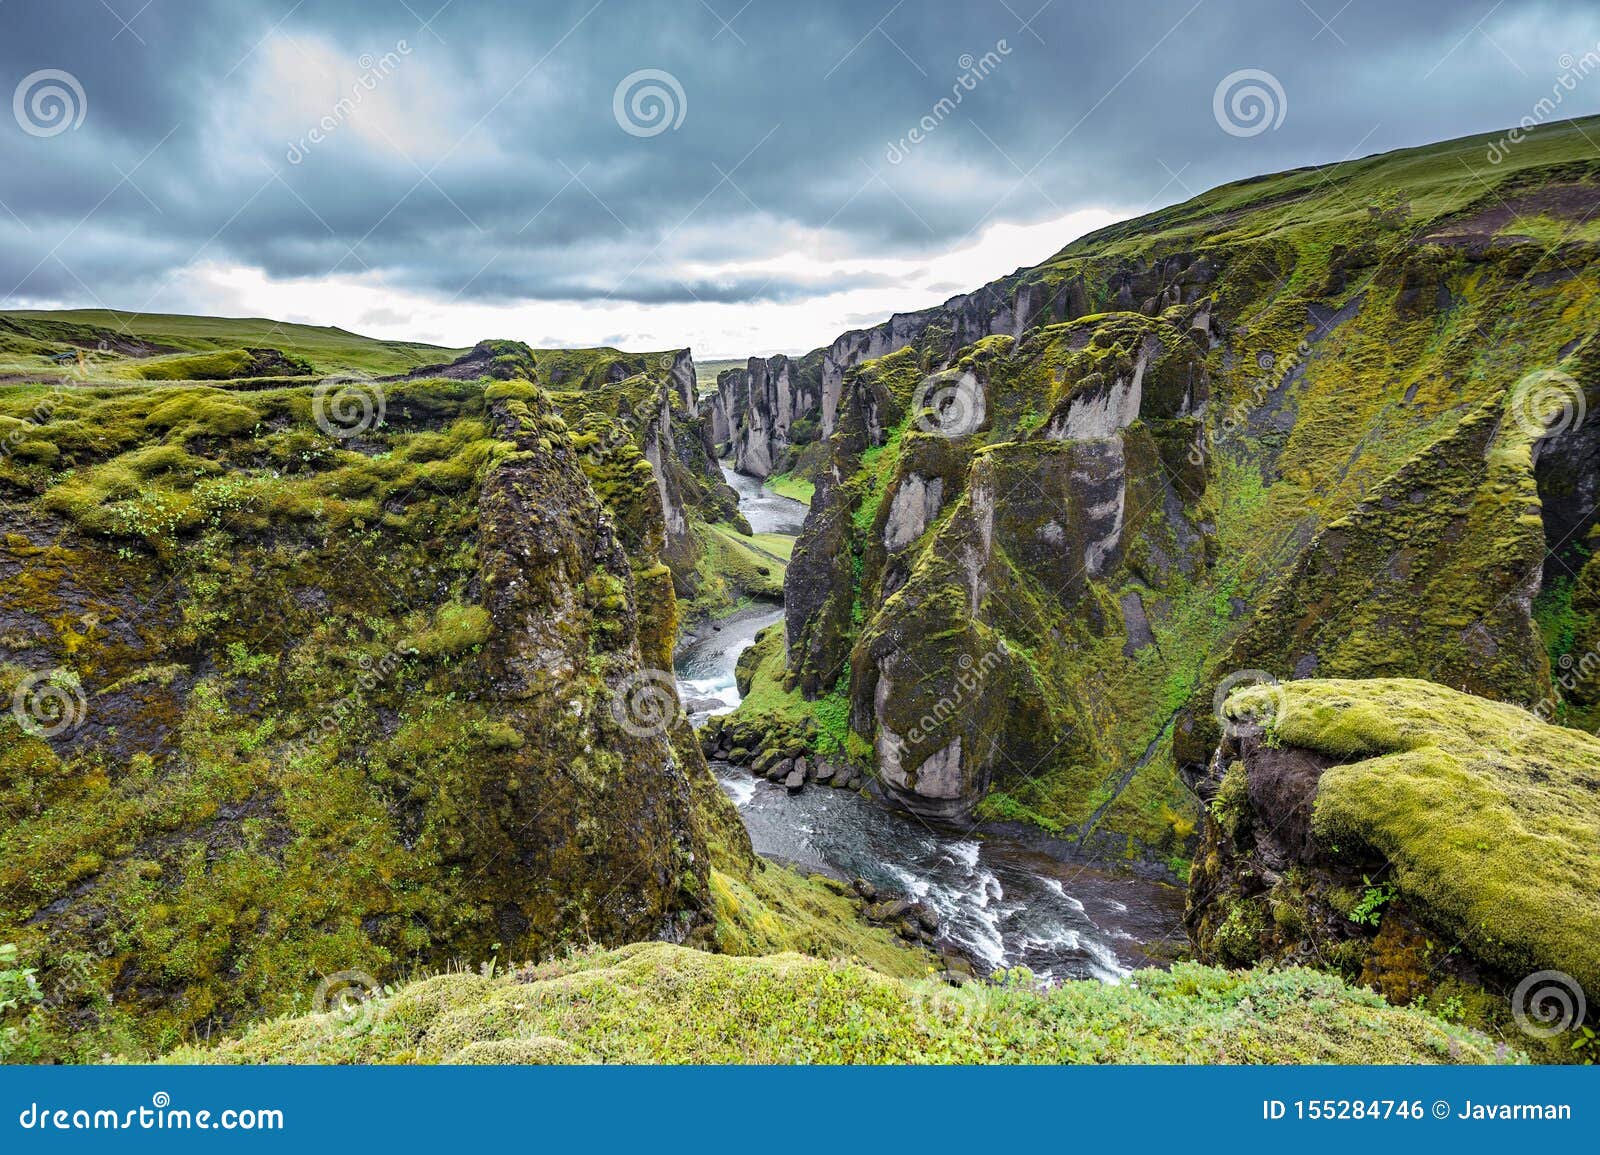 Fjadrargljufur Canyon In South East Of Iceland Stock Photo Image Of